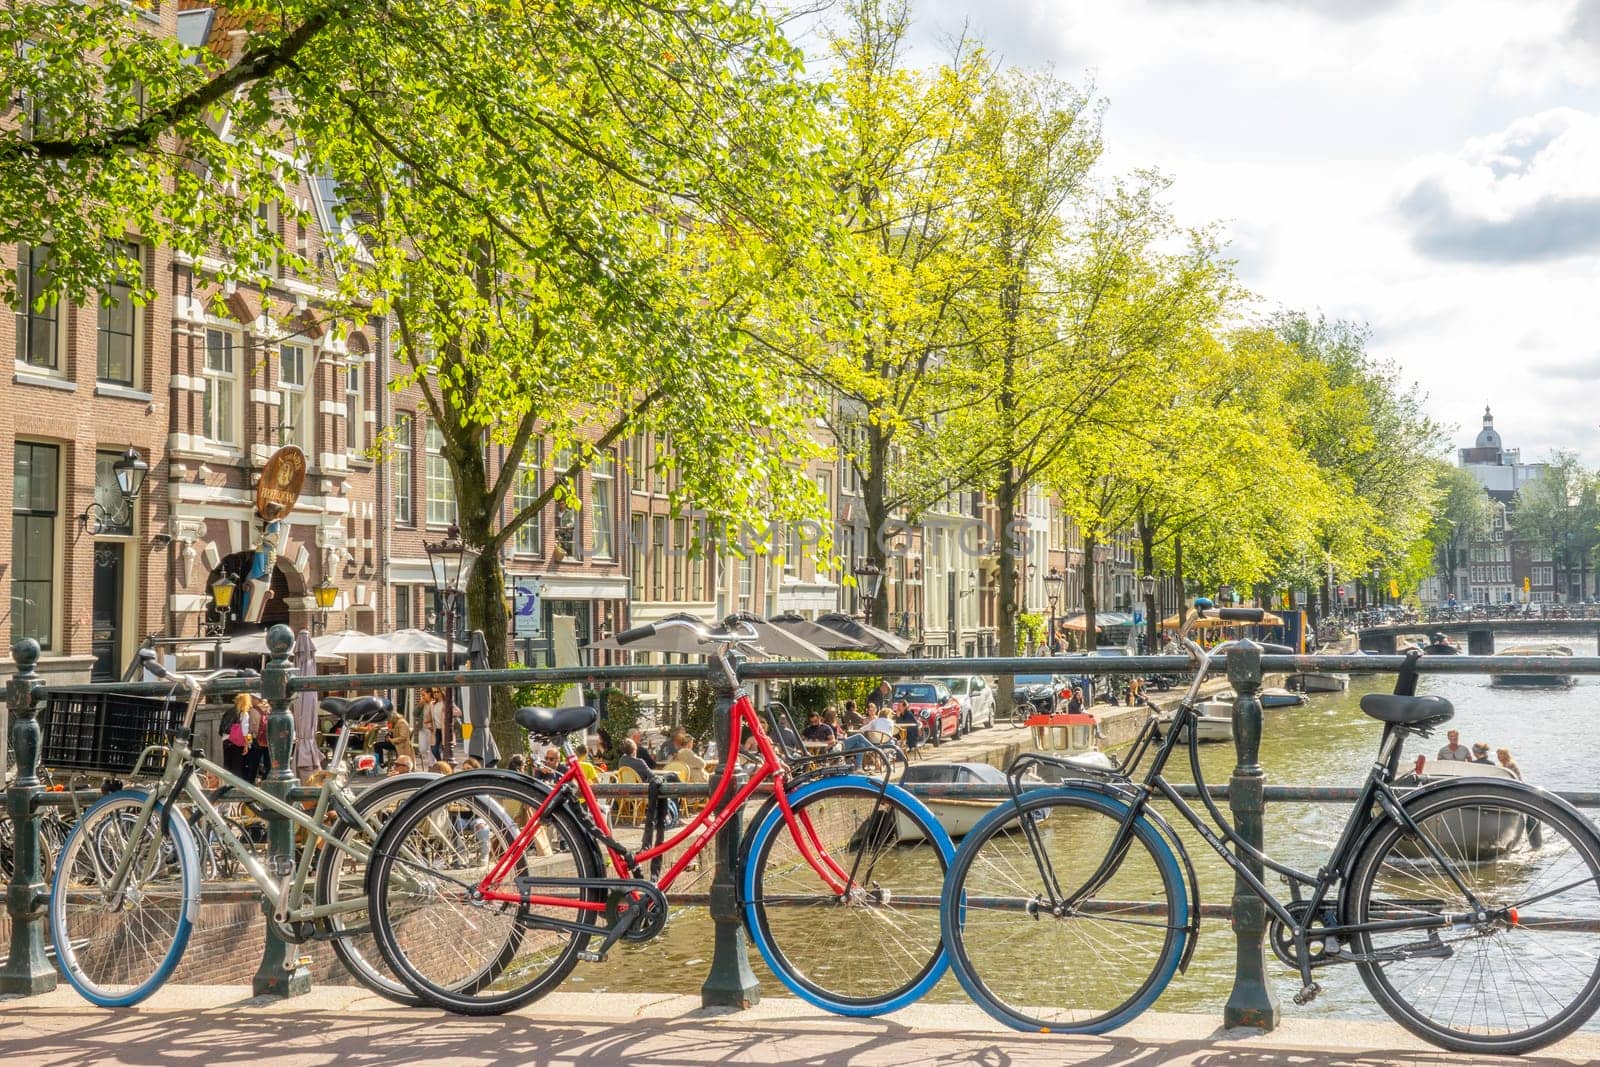 Netherlands. Sunny summer day in Amsterdam. Parked bicycles on the bridge over the canal. Small street cafe on the waterfront